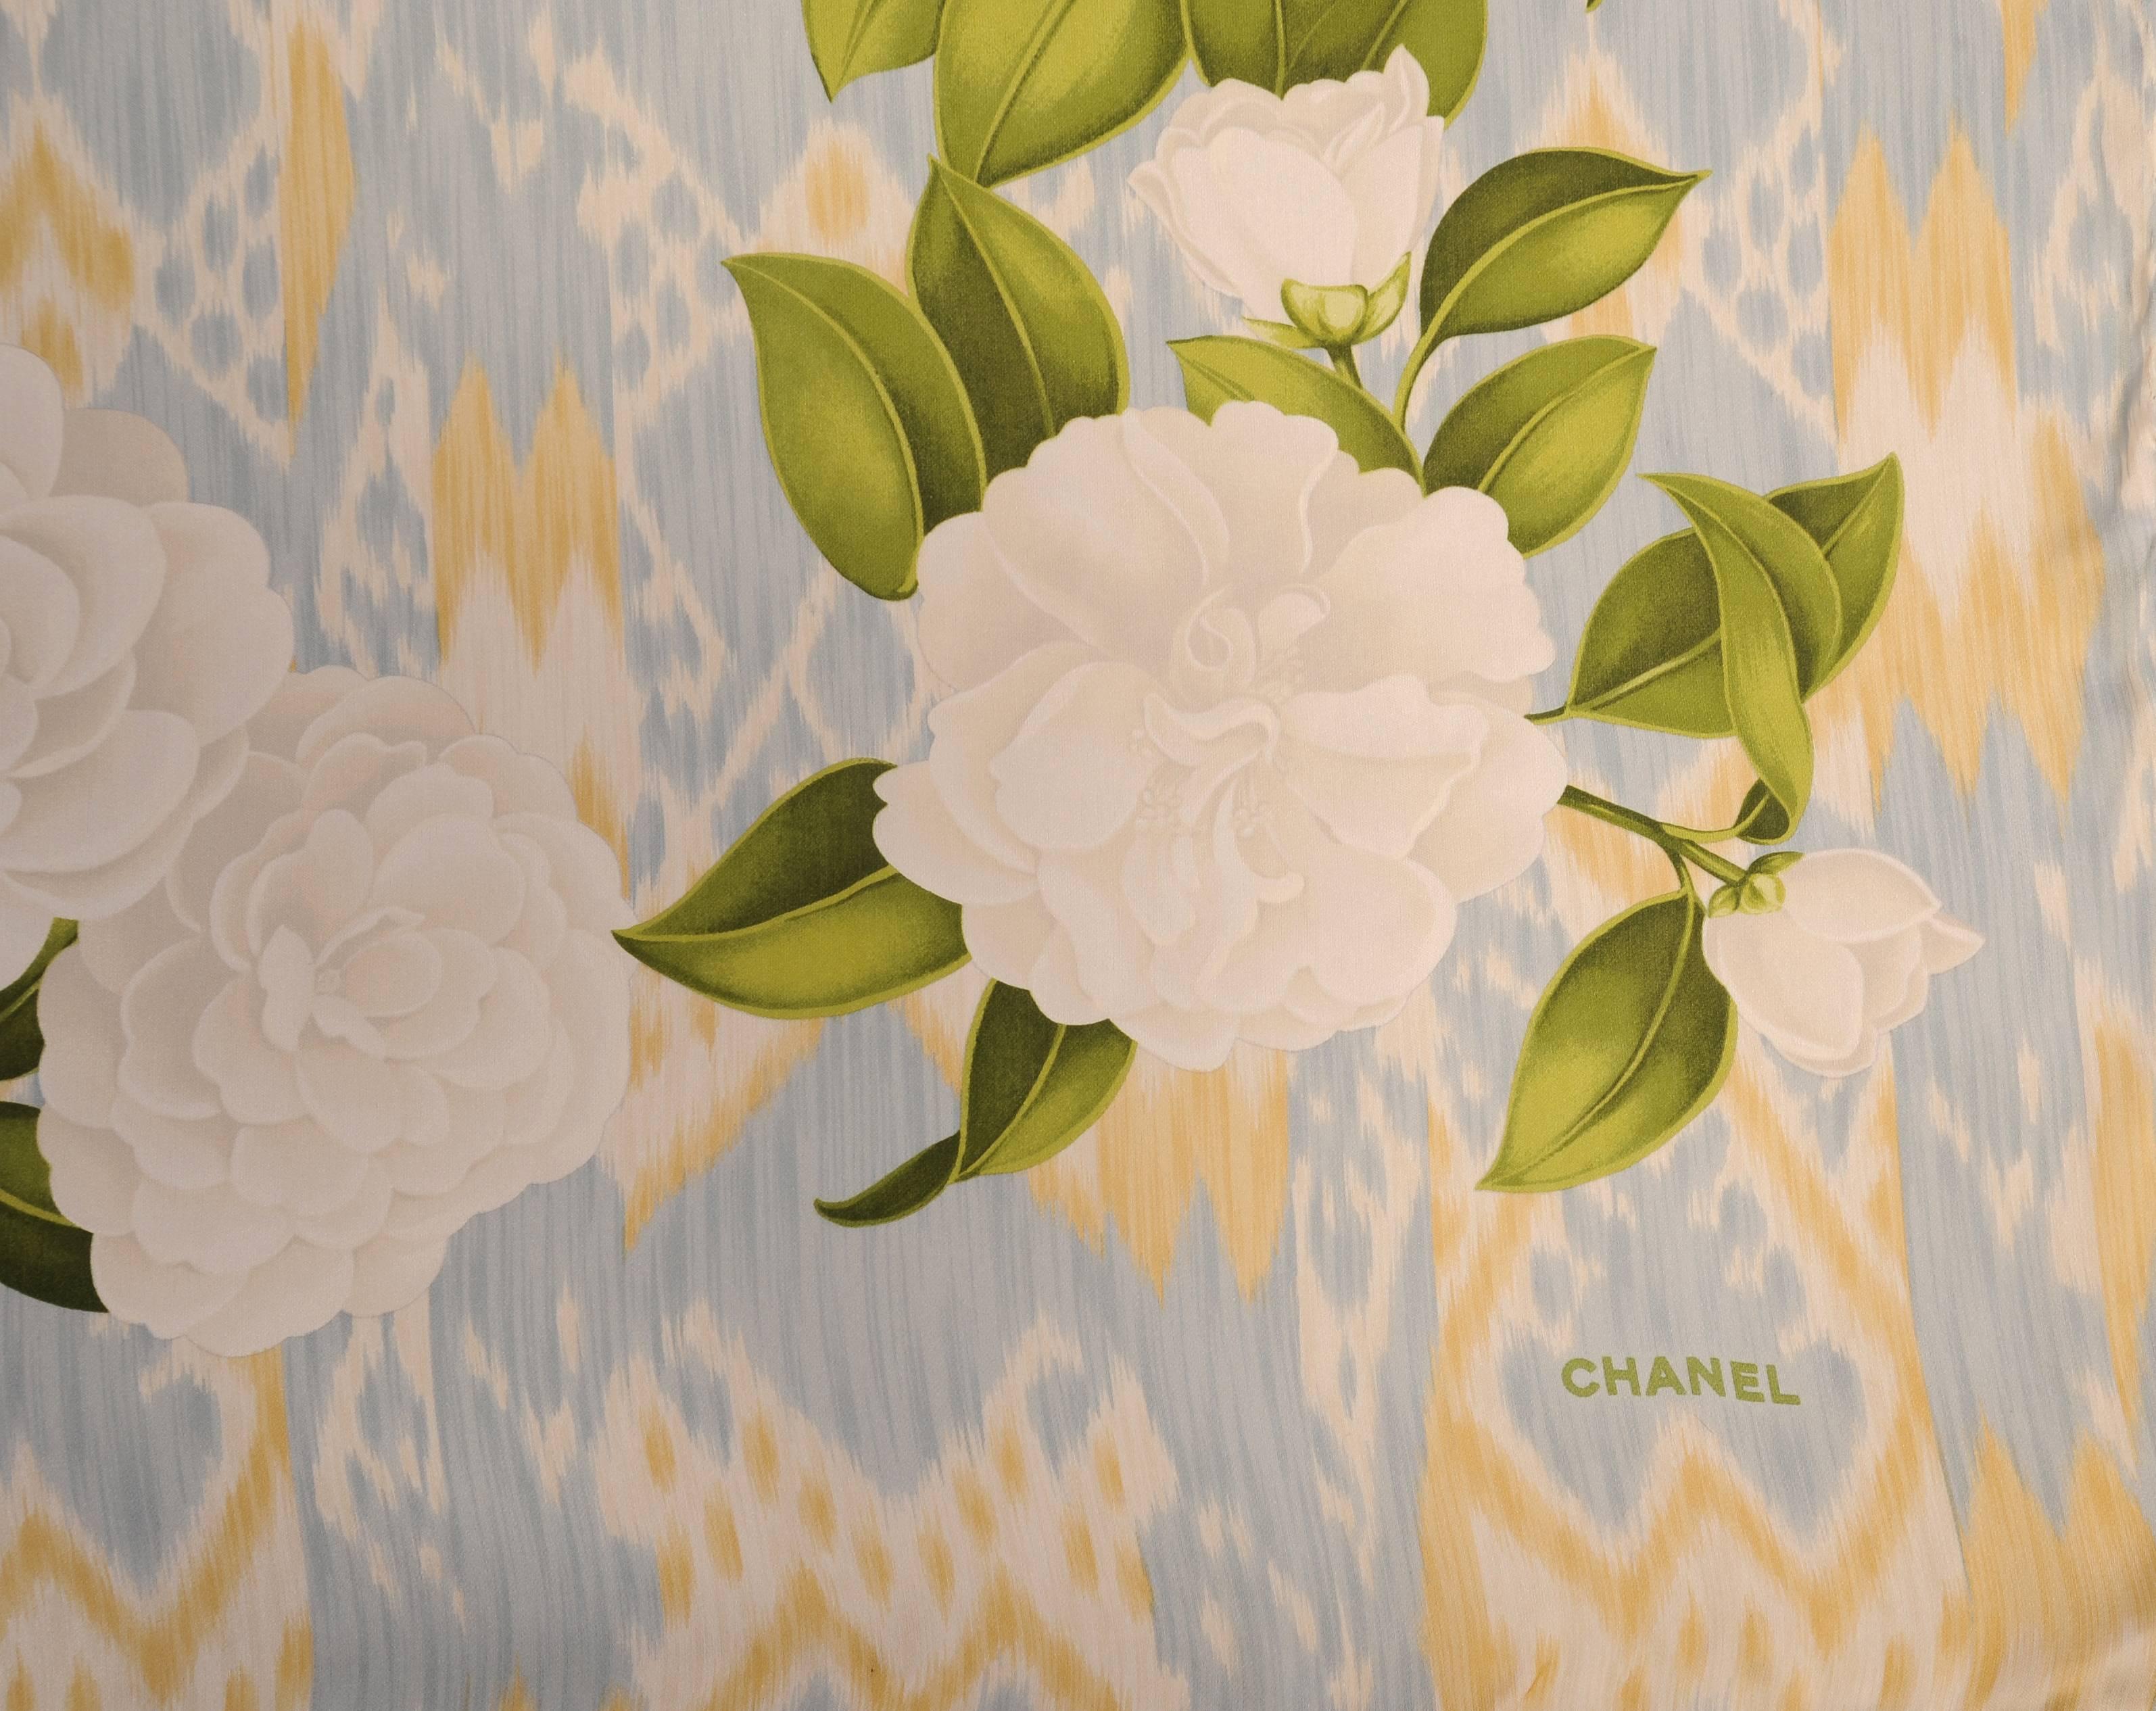 A summer weight silk scarf is strewn with white camellias and green leaves on a light blue, yellow and white Ikat pattern background. It is marked Chanel in one corner and still retains the original Saks Fifth Avenue tag and box. It is in excellent